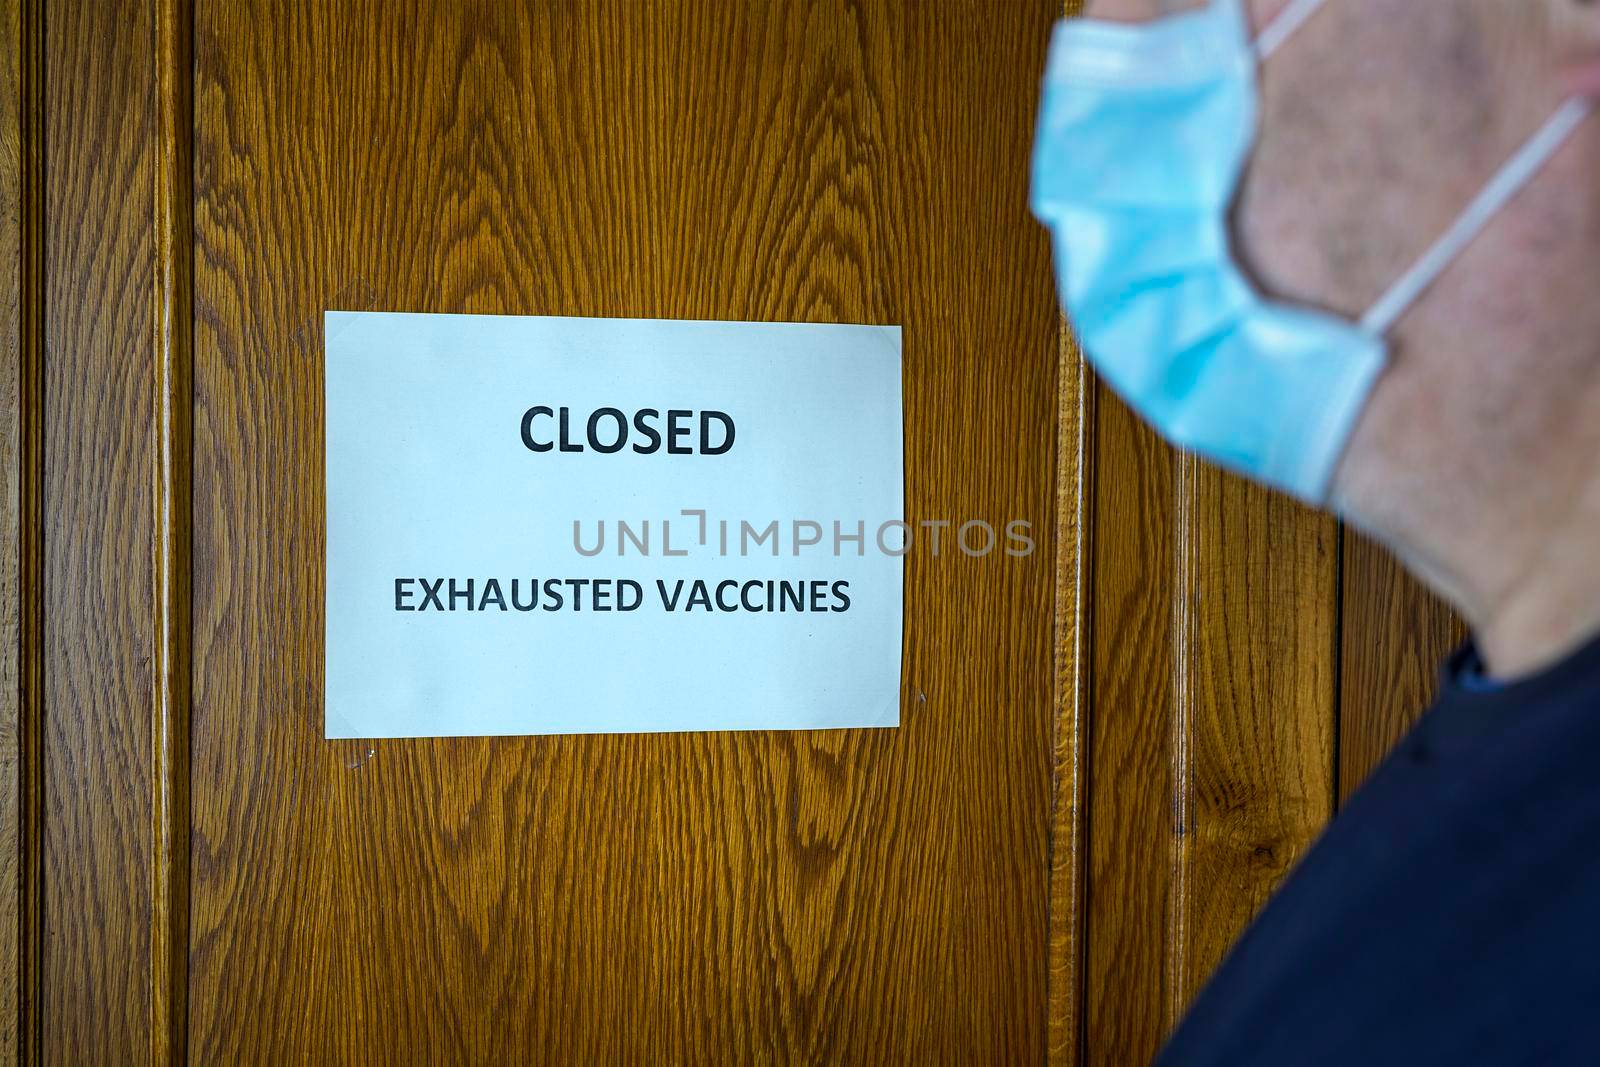 Exhausted Vaccines sign by sergiodv